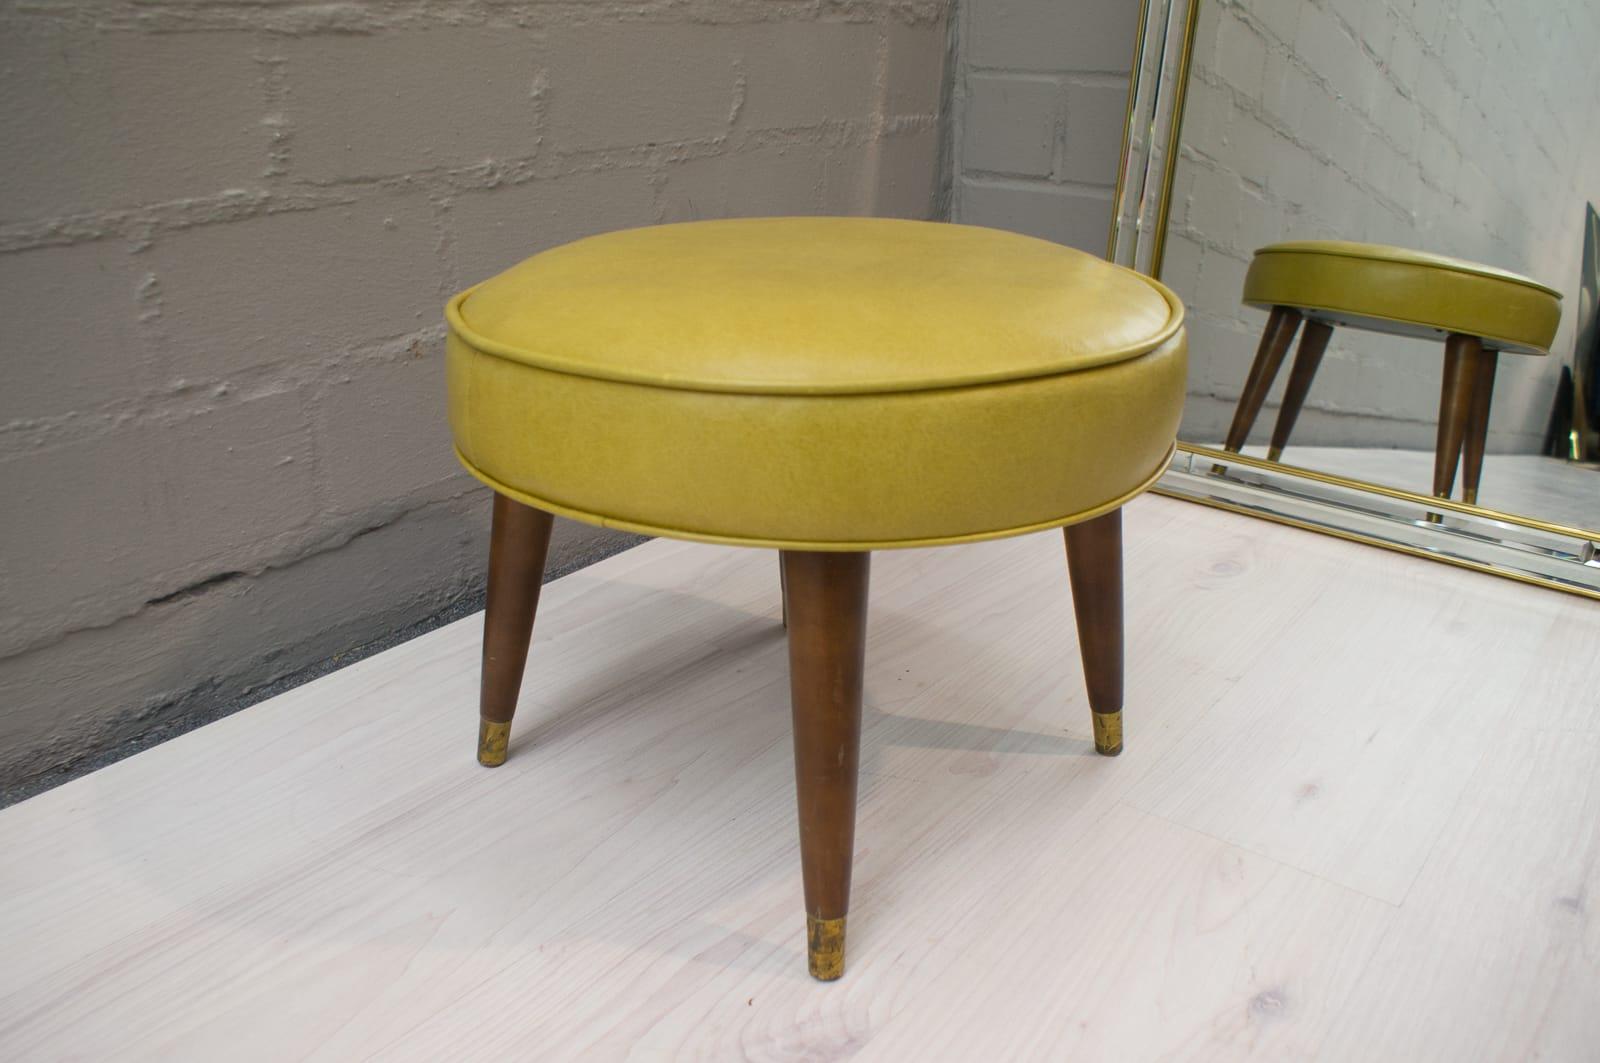 Very elegant 1950s stool. 

Very good vintage condition with slight signs of wear.